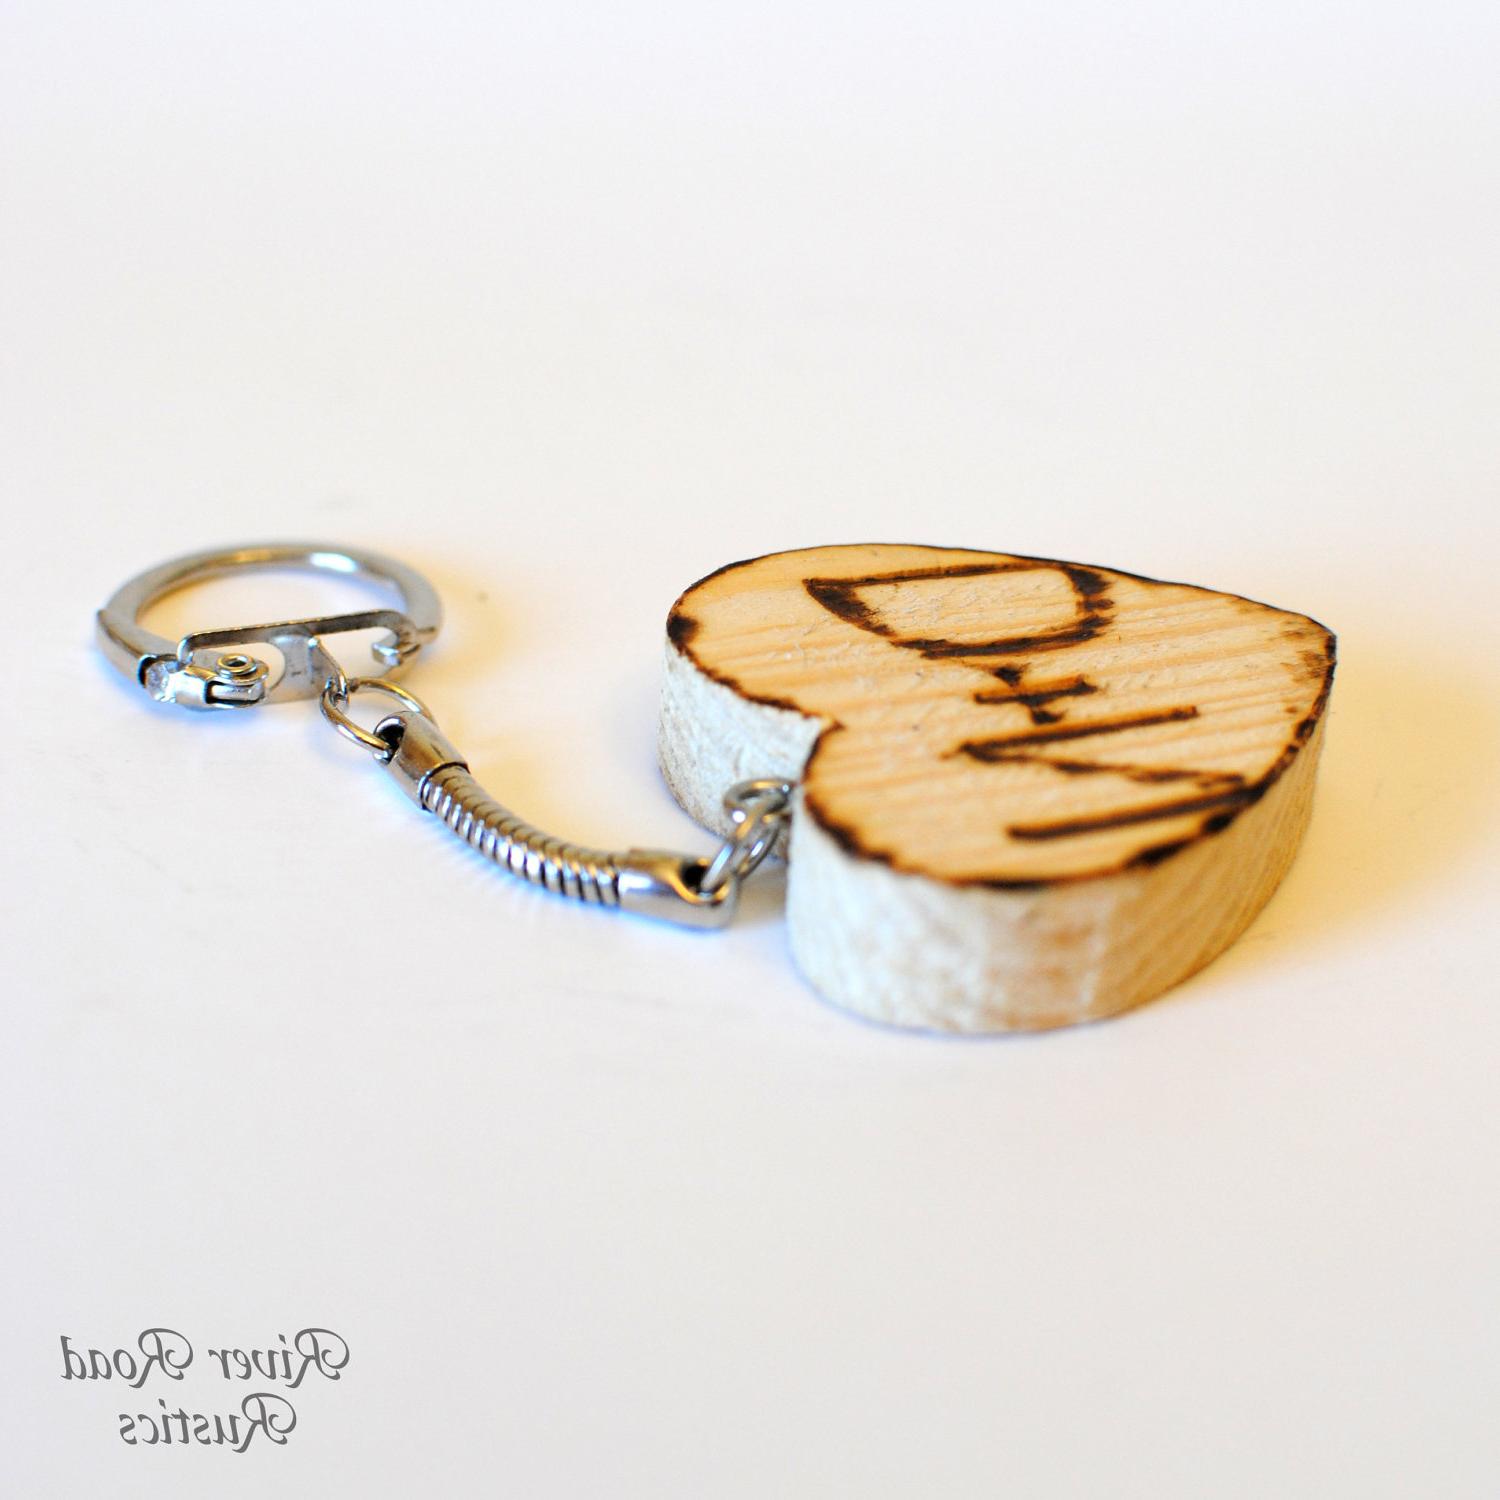 Rustic Wedding Favor- Personalized Wood Heart Key Chain For your Country,